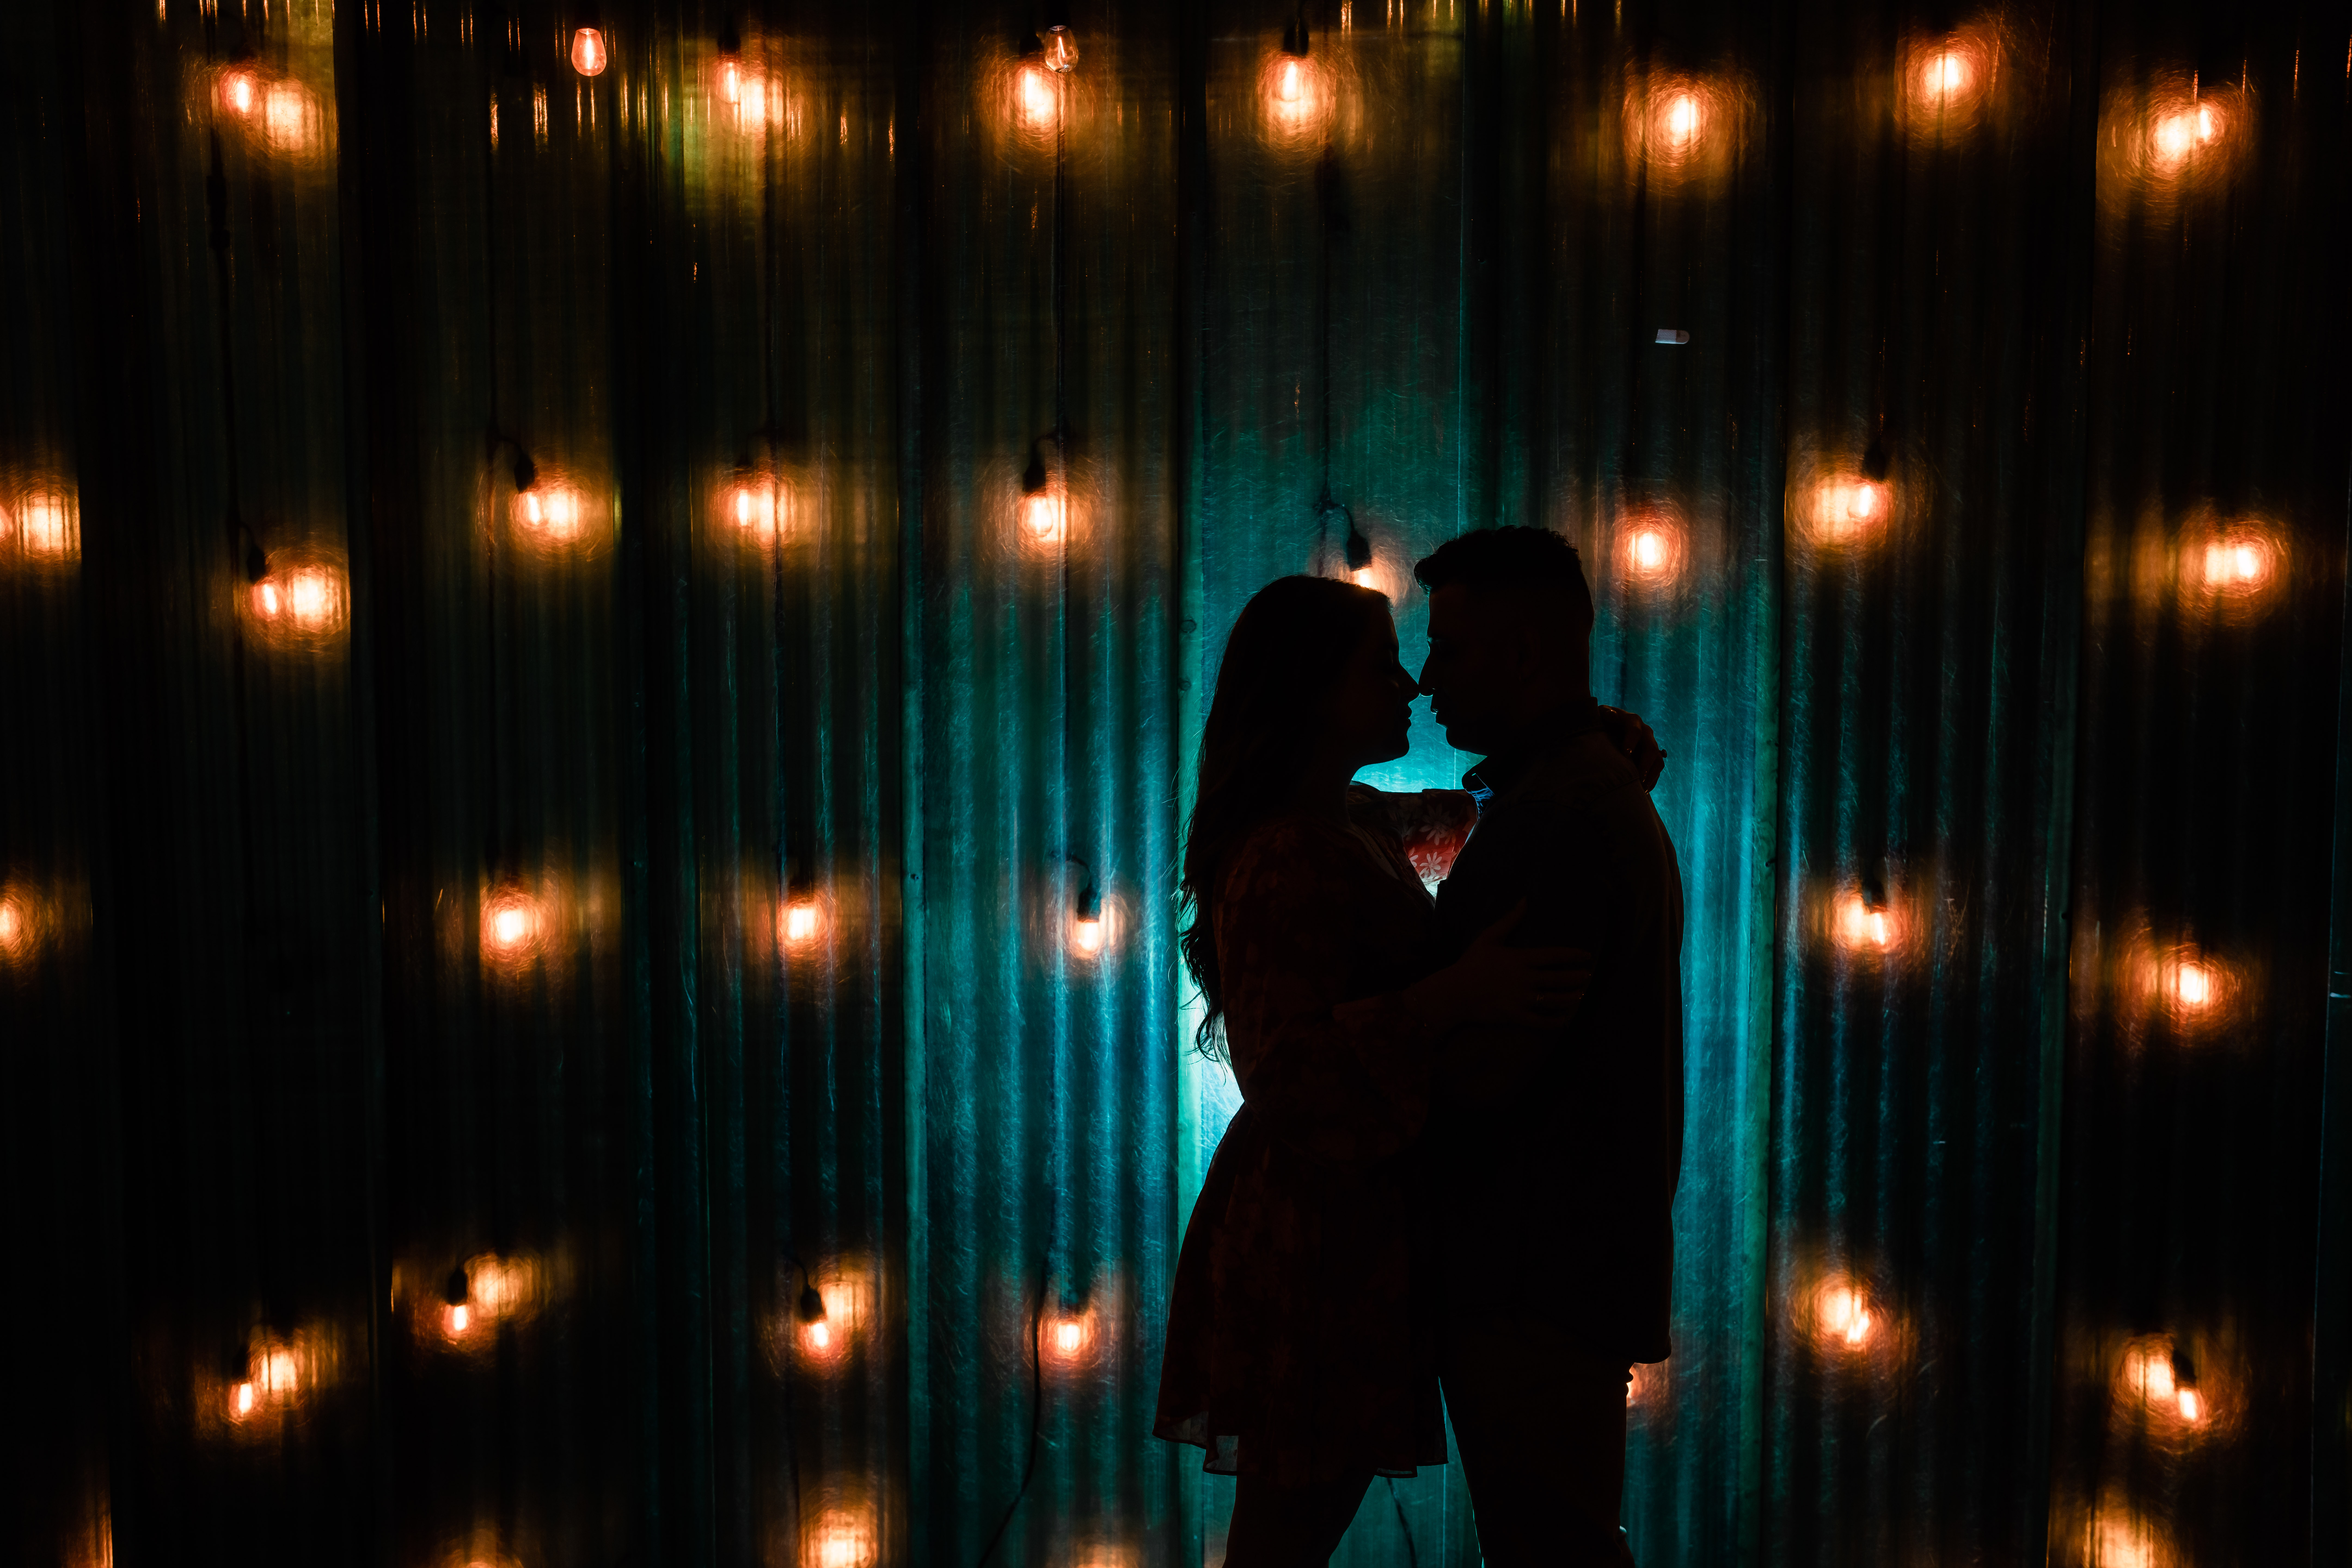 Art Factory Engagement, Art Factory Photographer, Art Factory Engagement Photographer, NJ Engagement Photographer, silhouette photo of couple nose to nose while there are fluorescent  lightbulbs surrounding them at the art factory